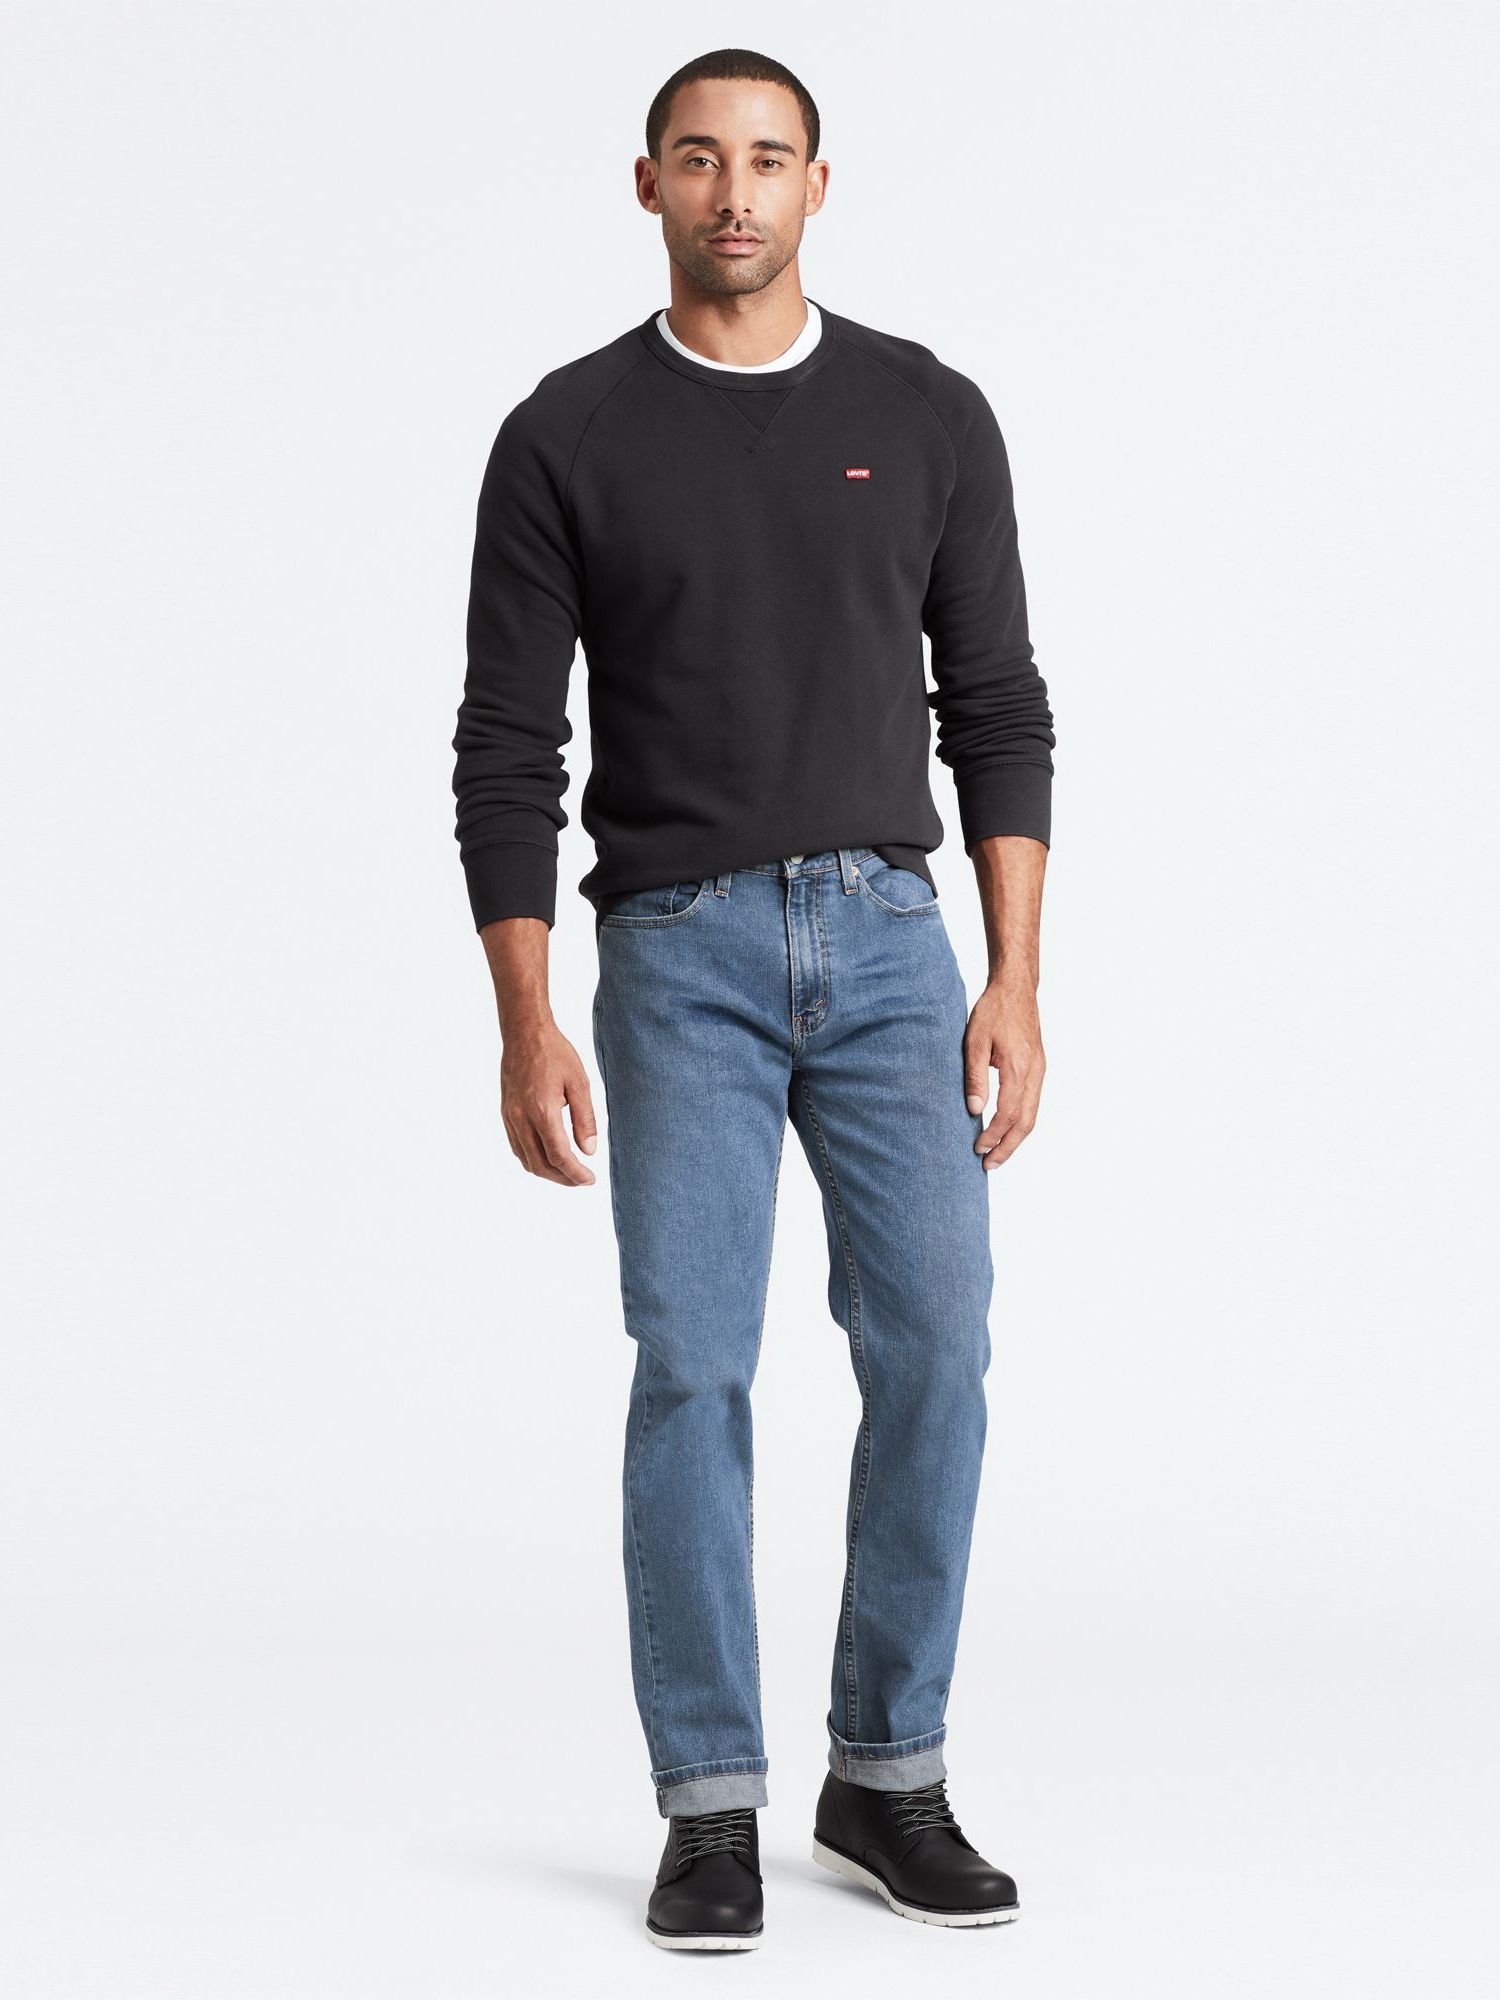 Buy Levi's 514 Straight Cut Jeans Online at johnlewis.com